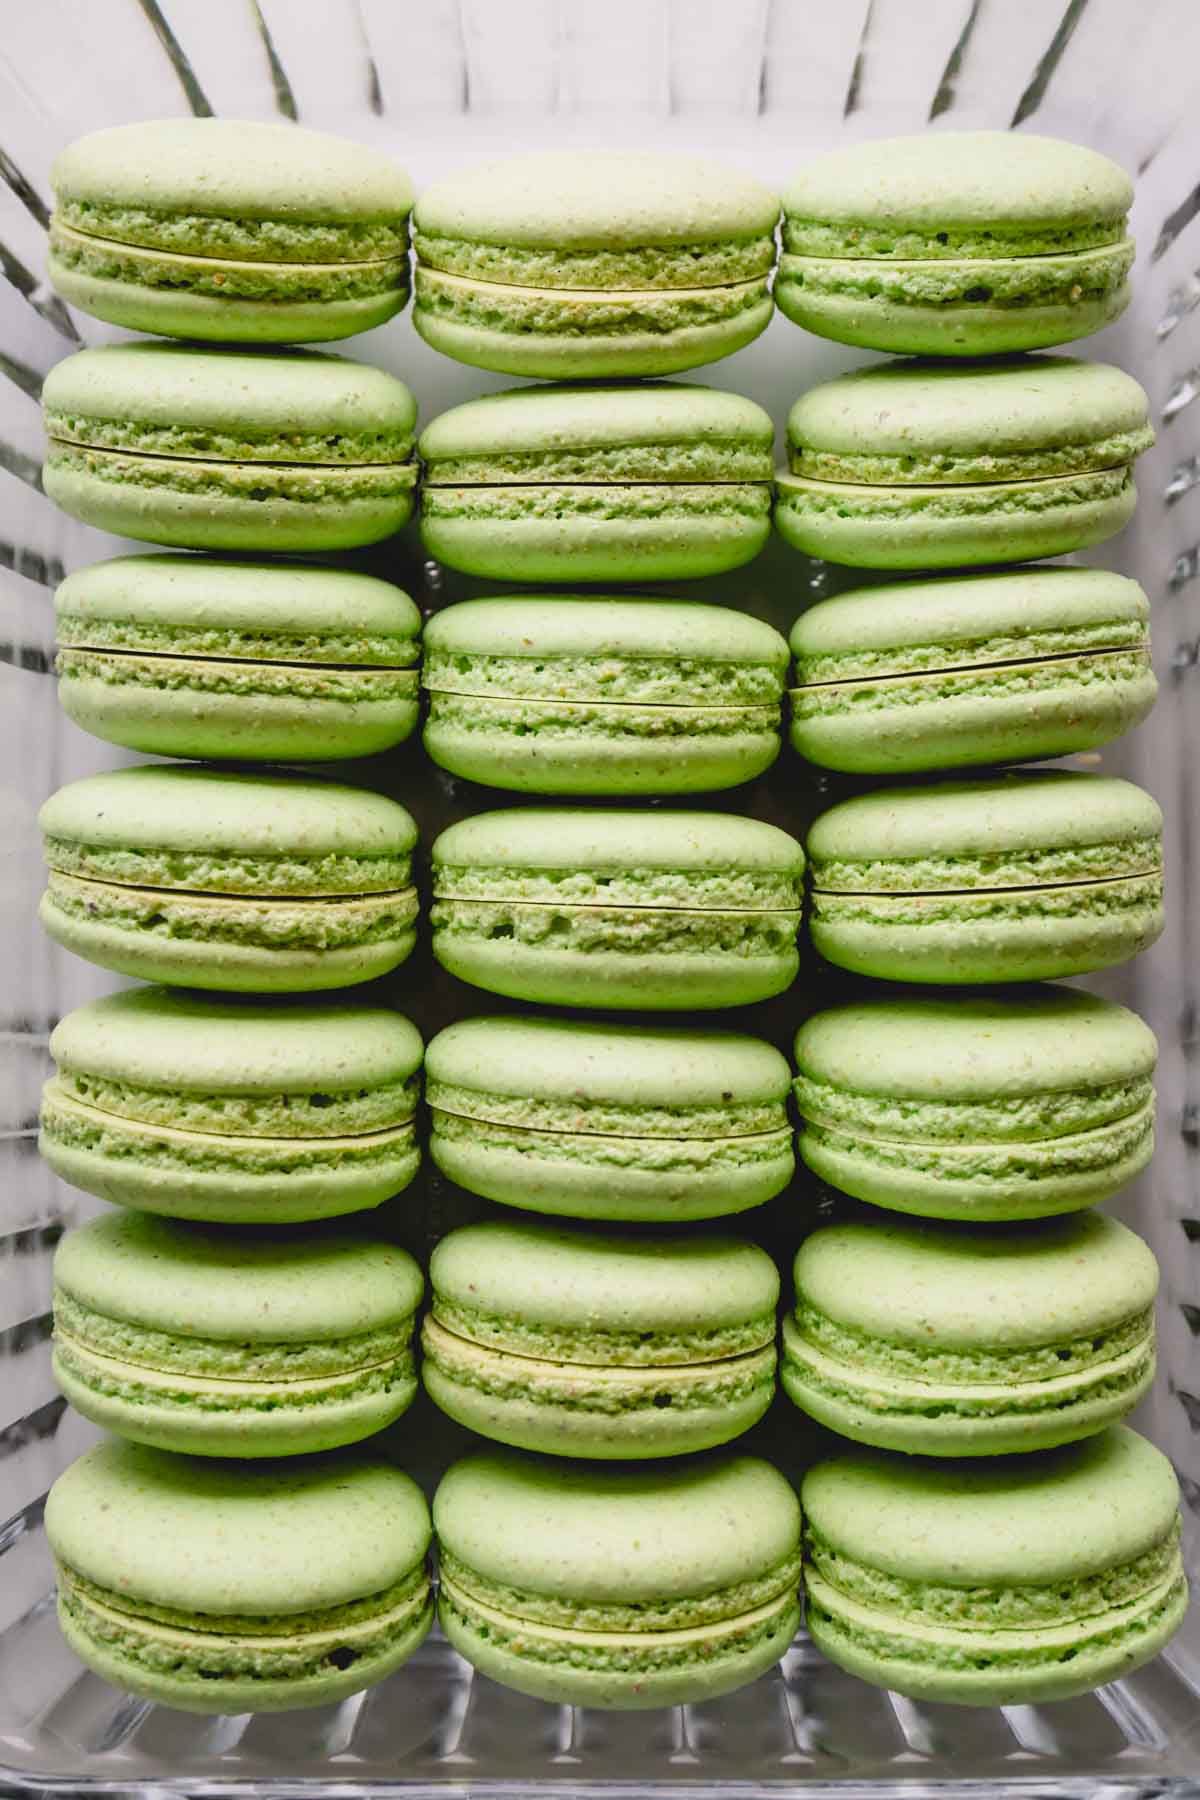 Paired pistachio macaron shells in a glass container.